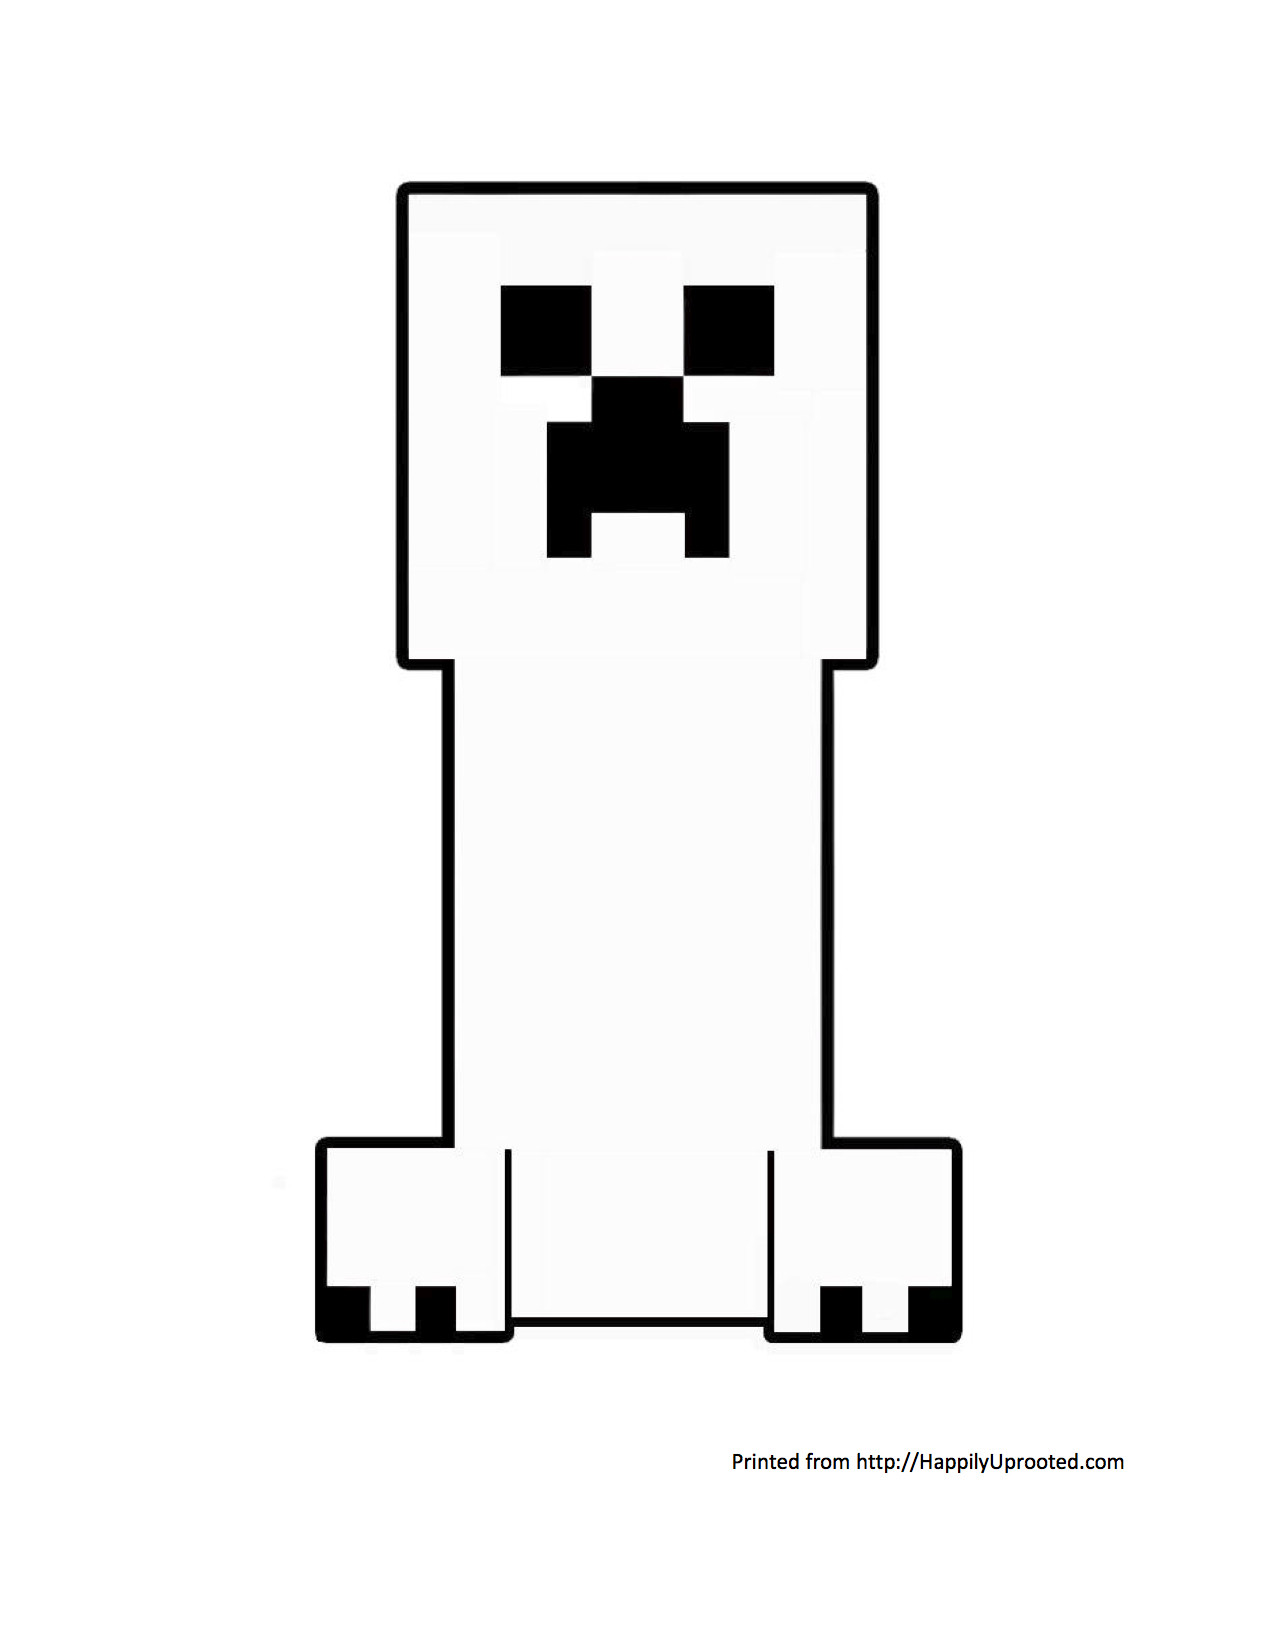 Minecraft Creeper Coloring Pages
 Pin Creeper minecraft colouring pages on Pinterest